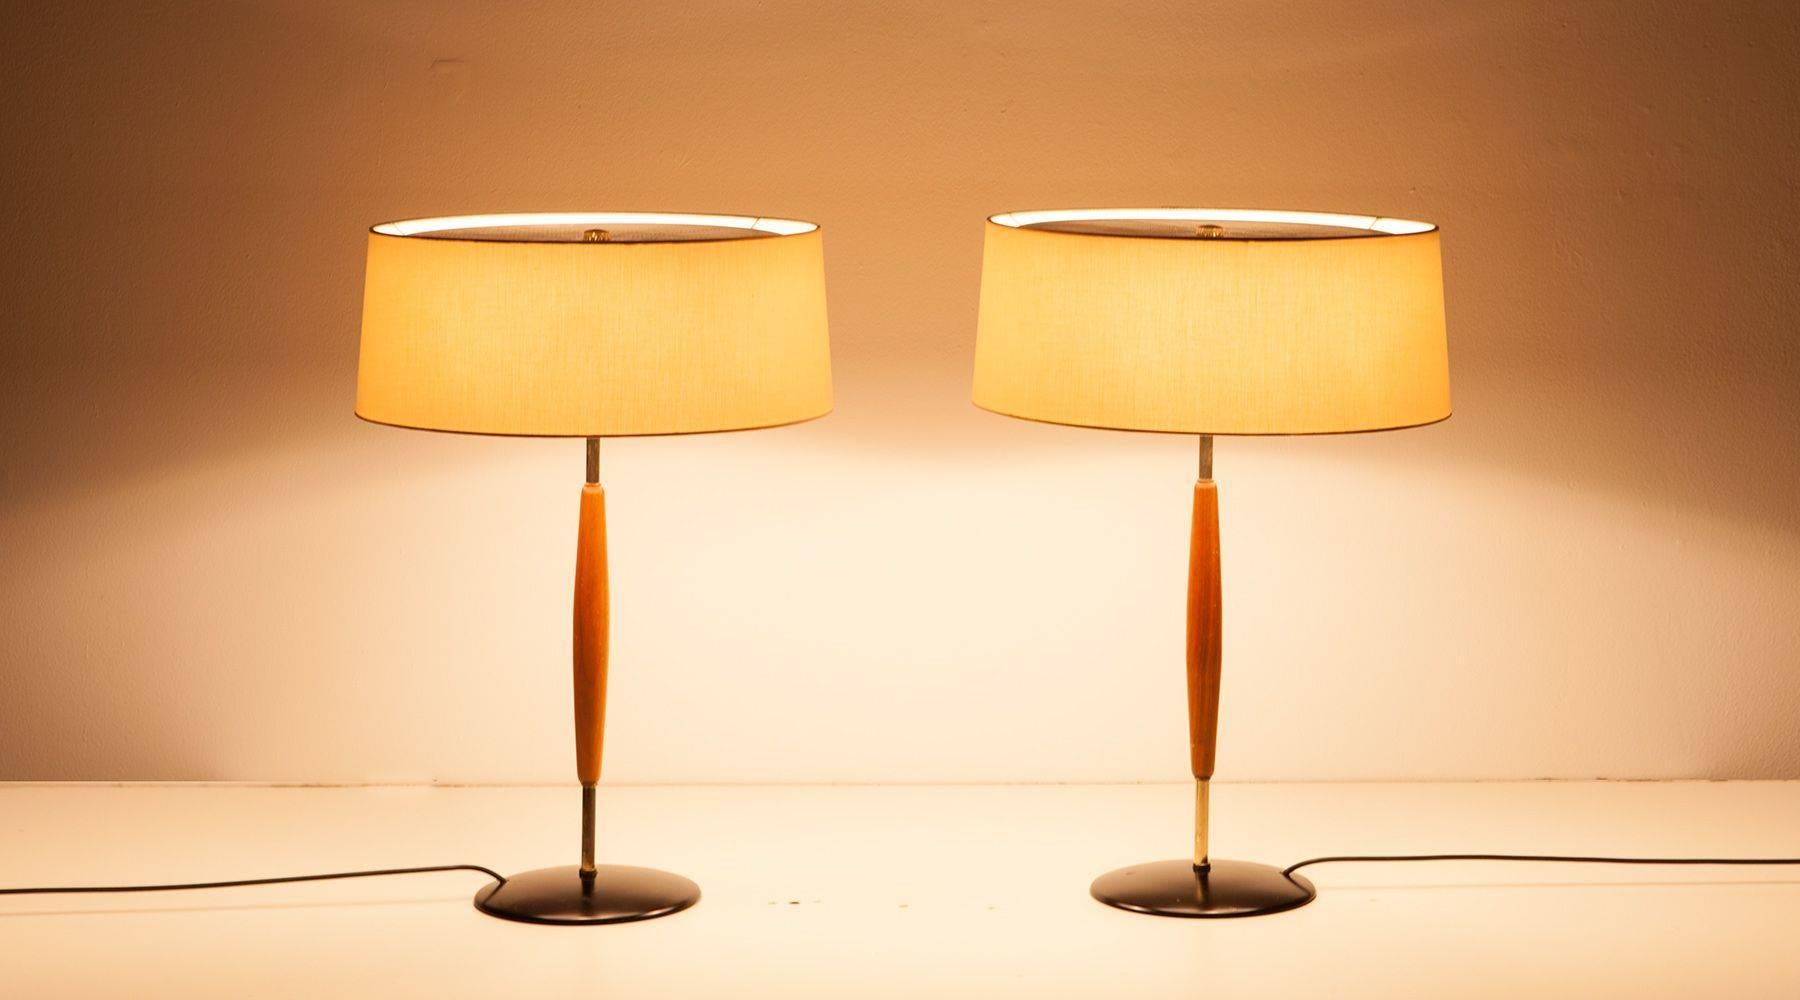 Pair of perfectly sized table lamp by iconic lighting designer Gerald Thurston. This lamp retains its original white steel diffuser, linen wrapped shade and brass final and base. Manufactured by Lightolier. A Single example is available.